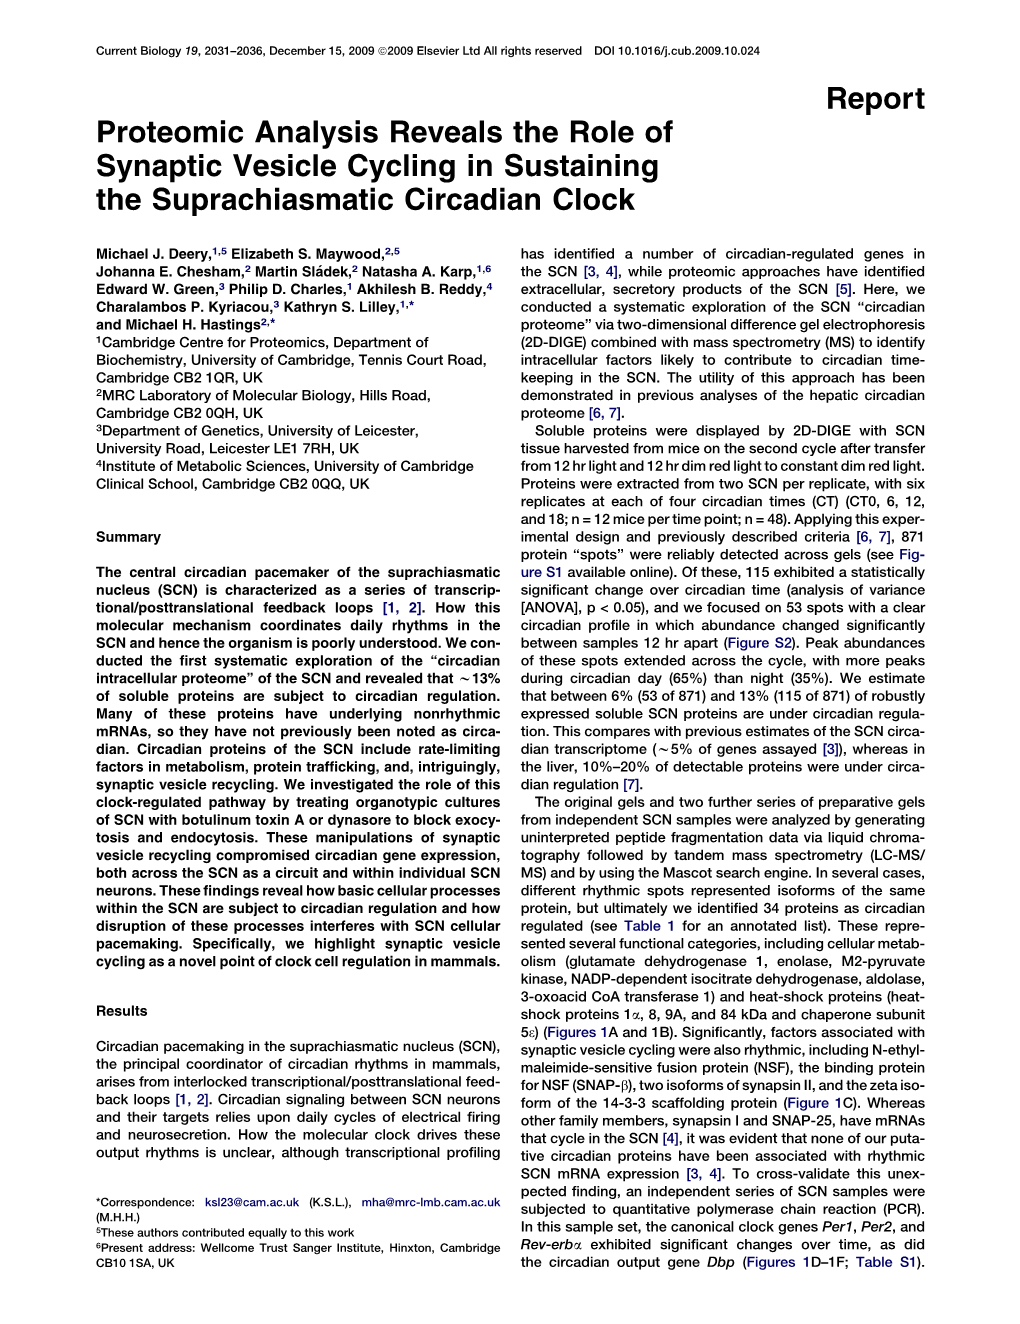 Proteomic Analysis Reveals the Role of Synaptic Vesicle Cycling in Sustaining the Suprachiasmatic Circadian Clock